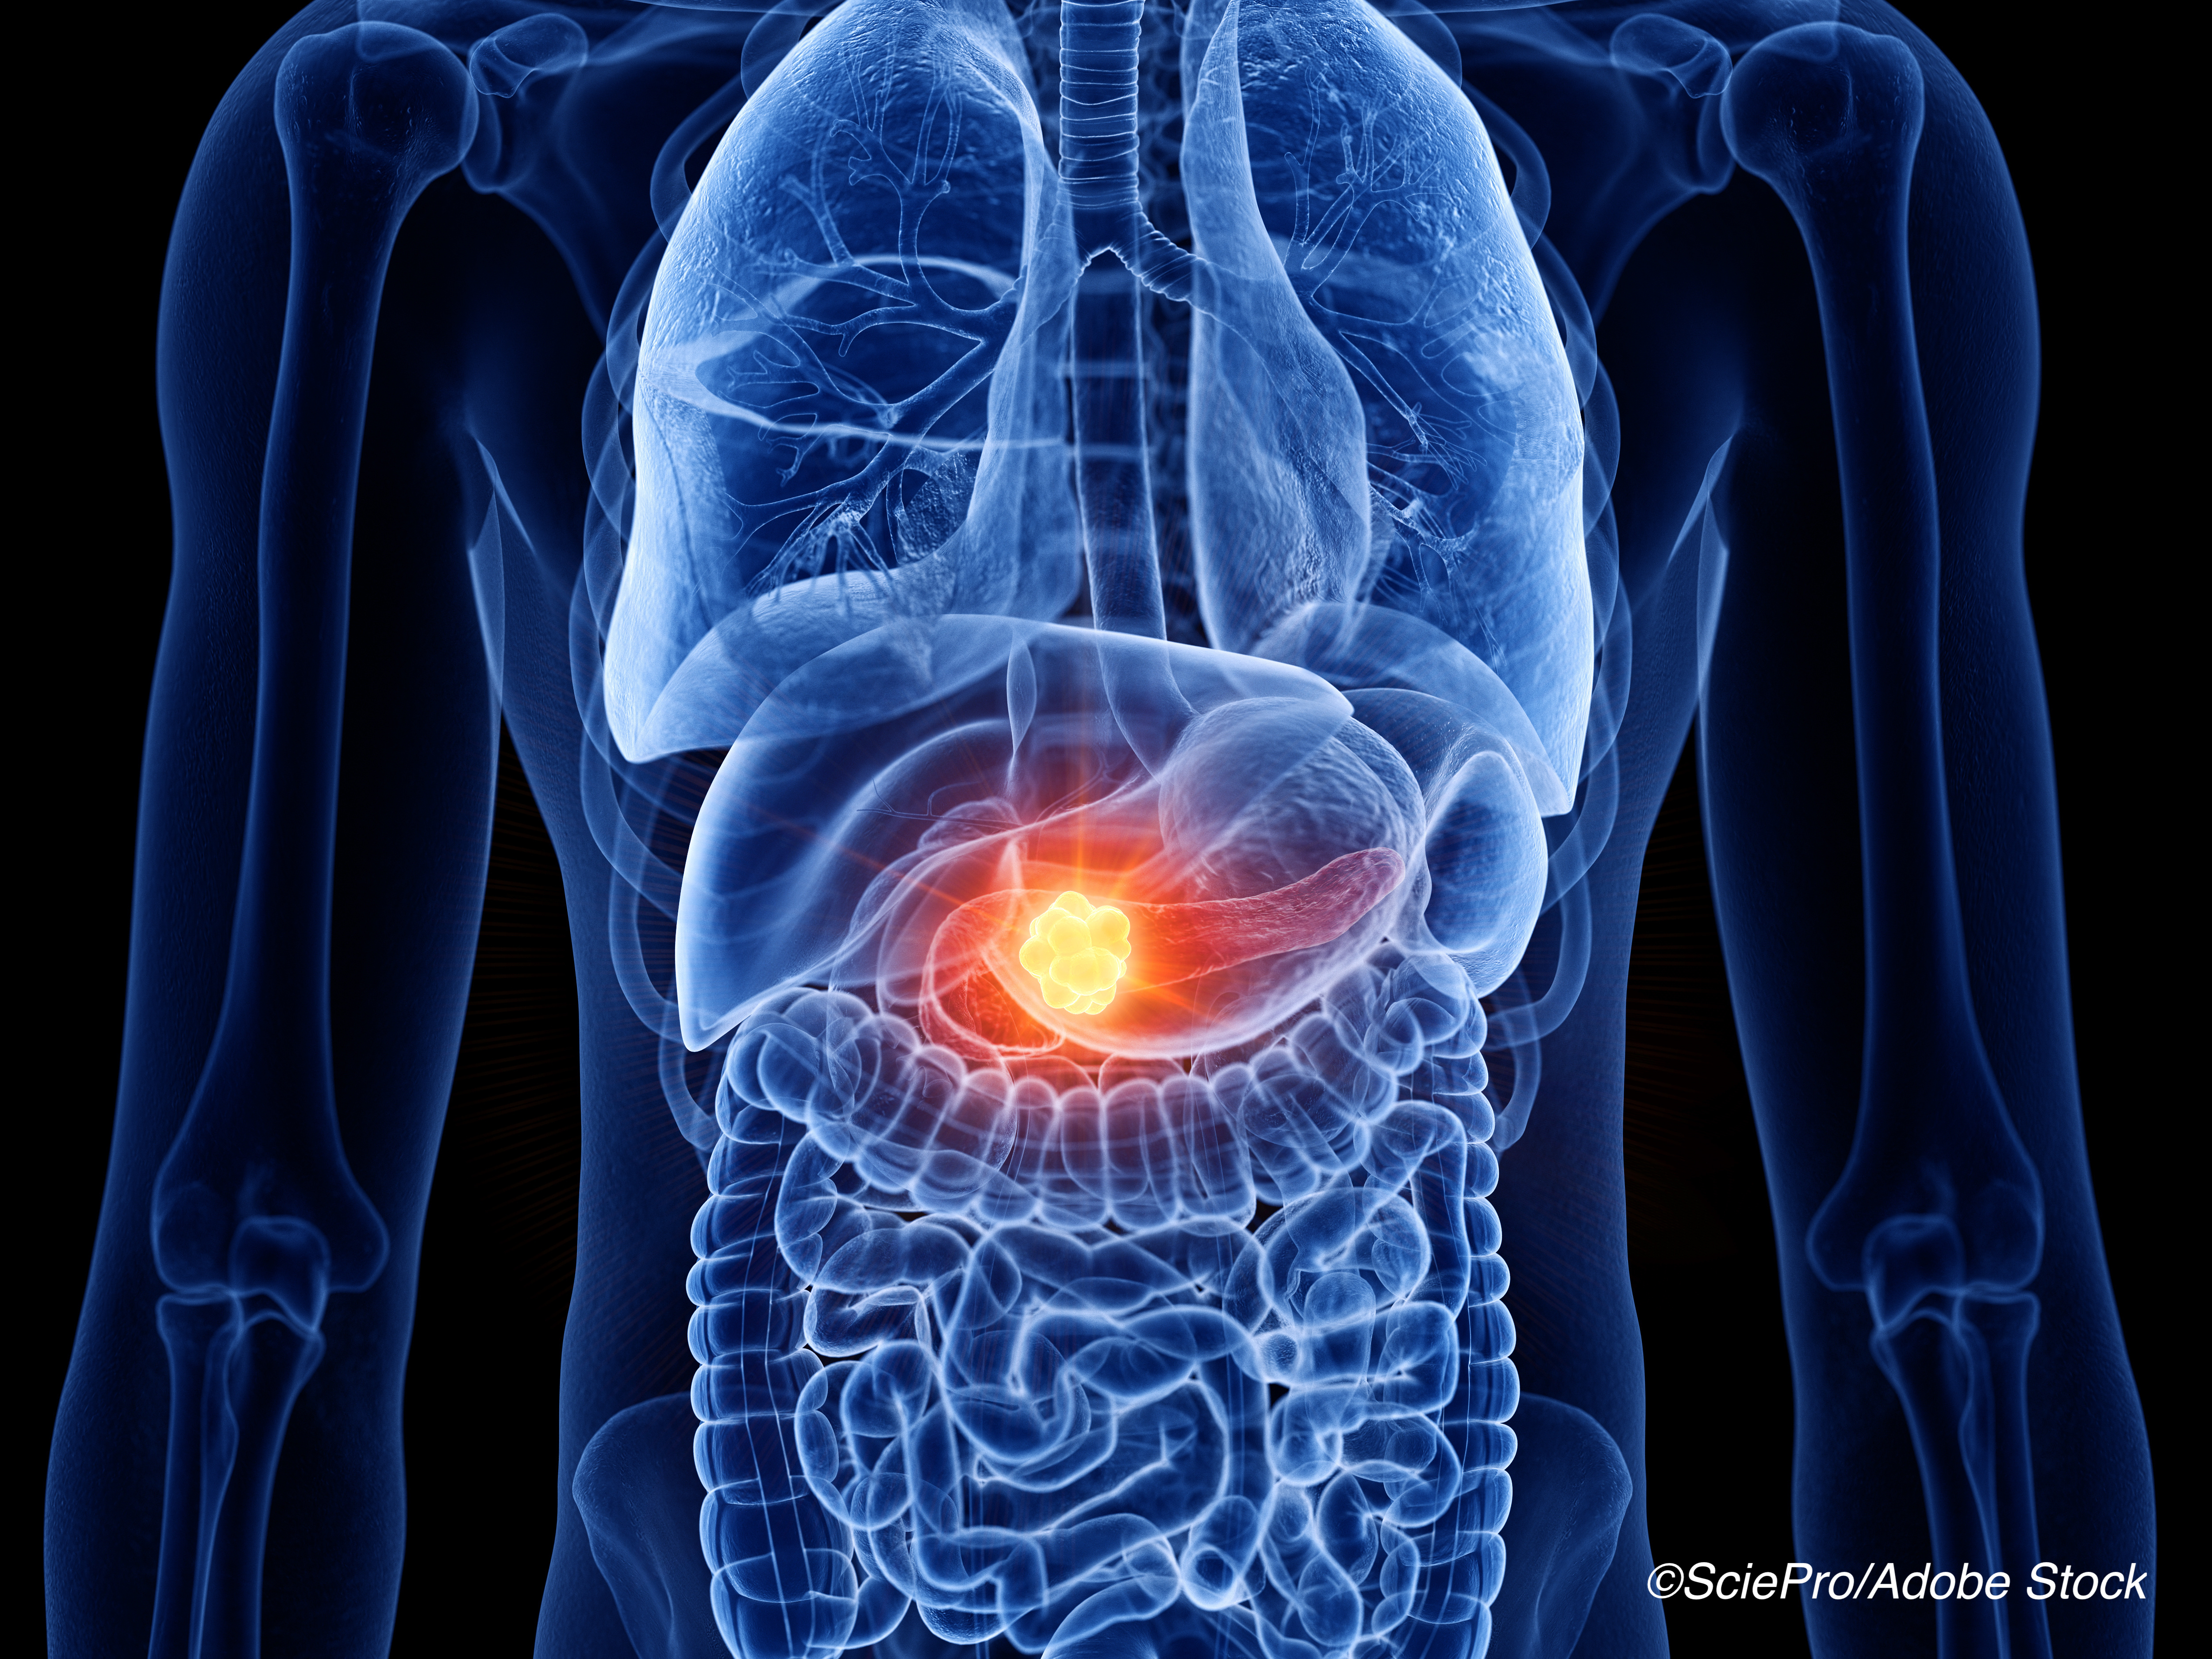 Ablative Radiation Tx for Advanced Pancreatic Cancer: Durable Tumor Control, Improved Survival